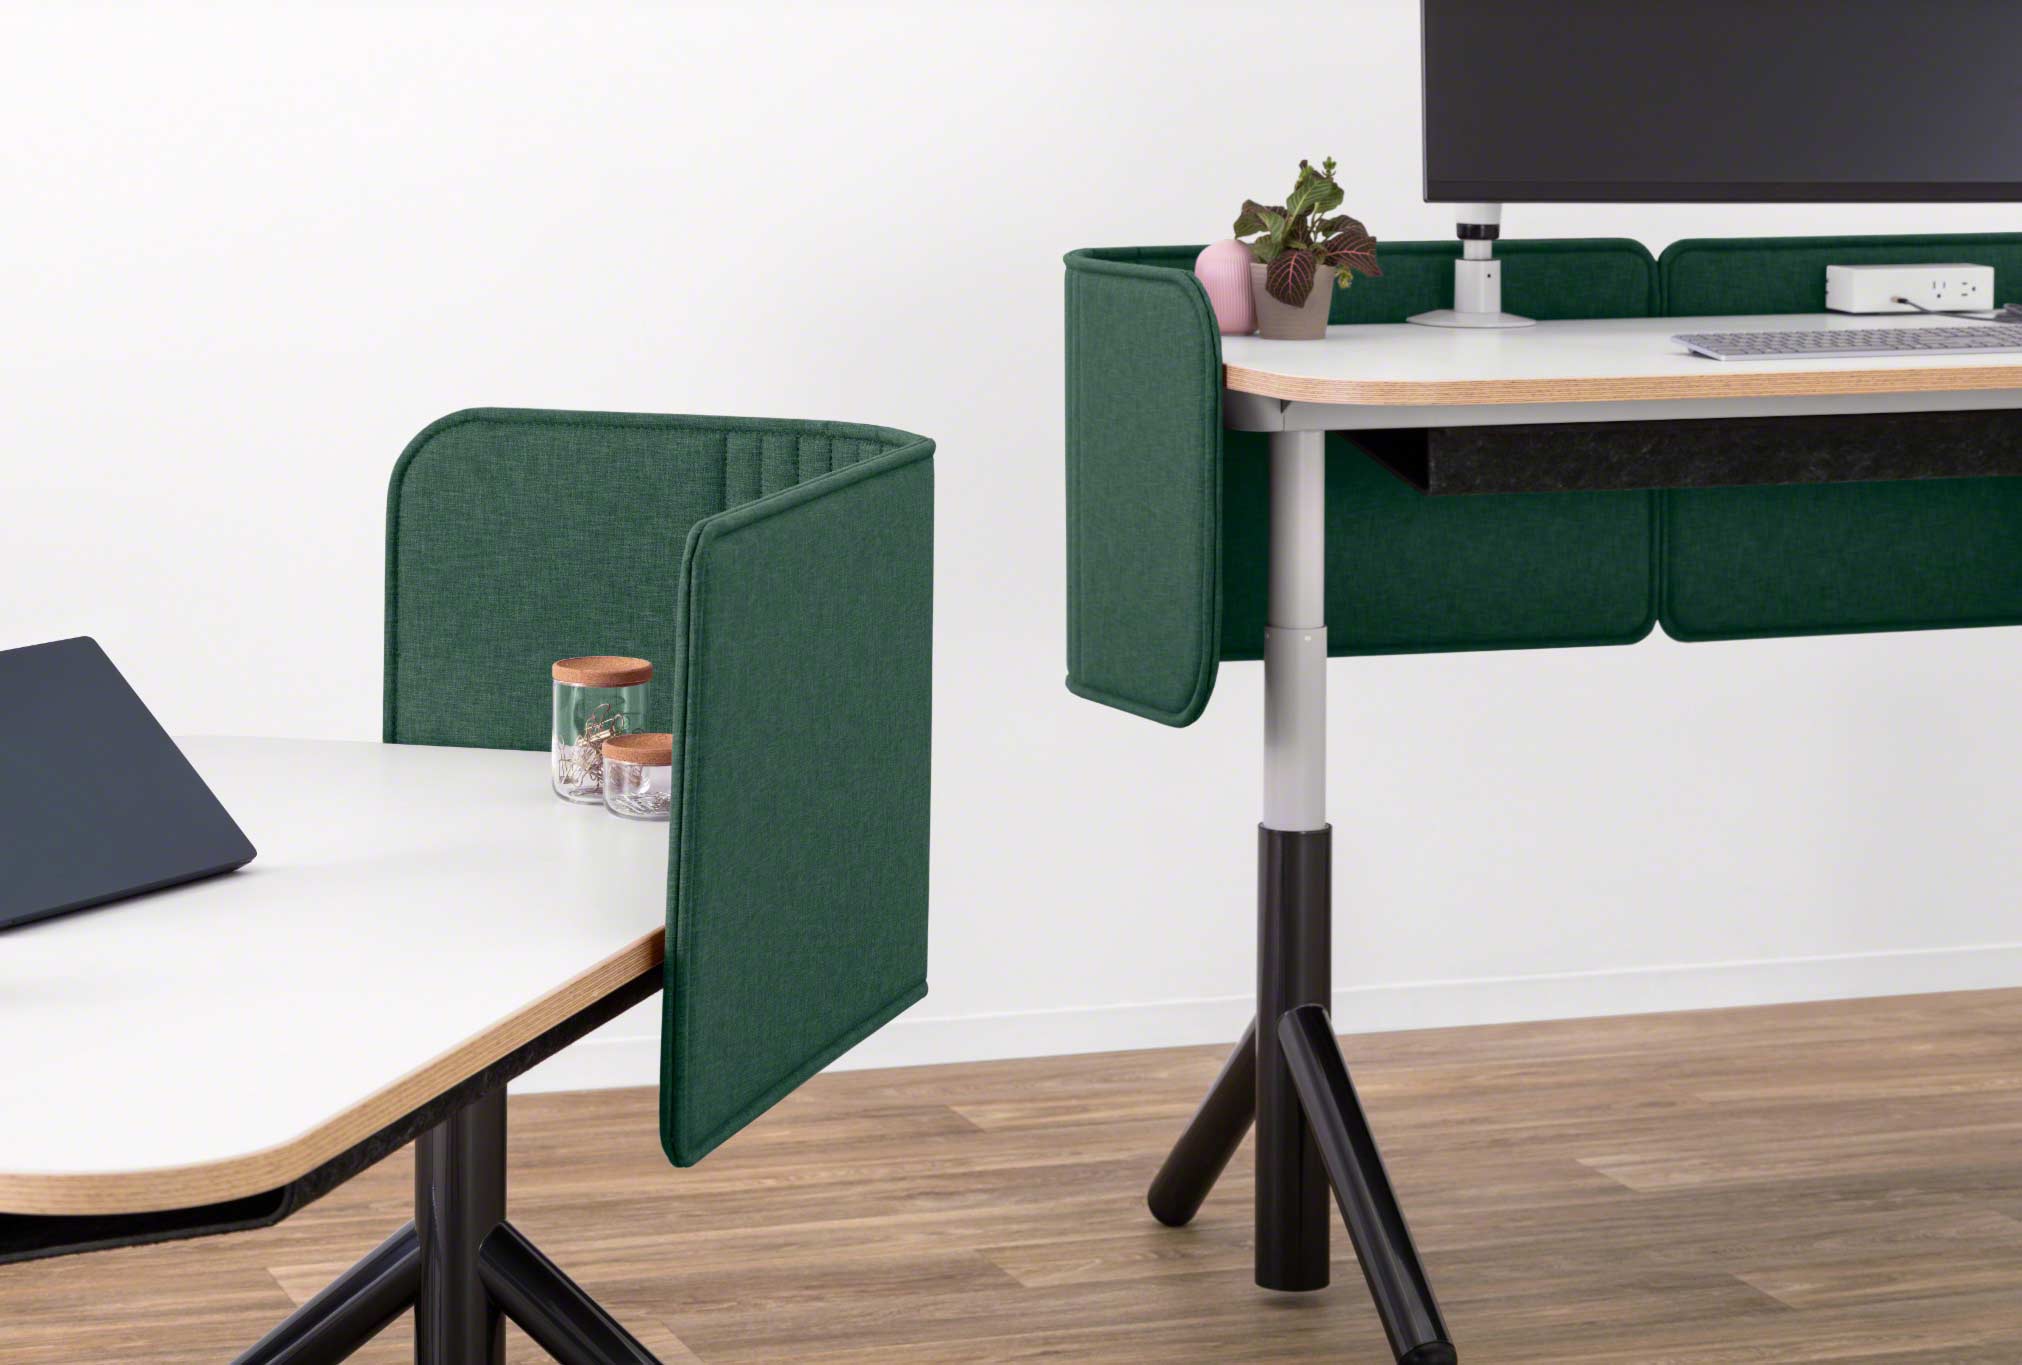 Close-up of Two Steelcase Flex height-adjustable desks pictured with green privacy screens attached.